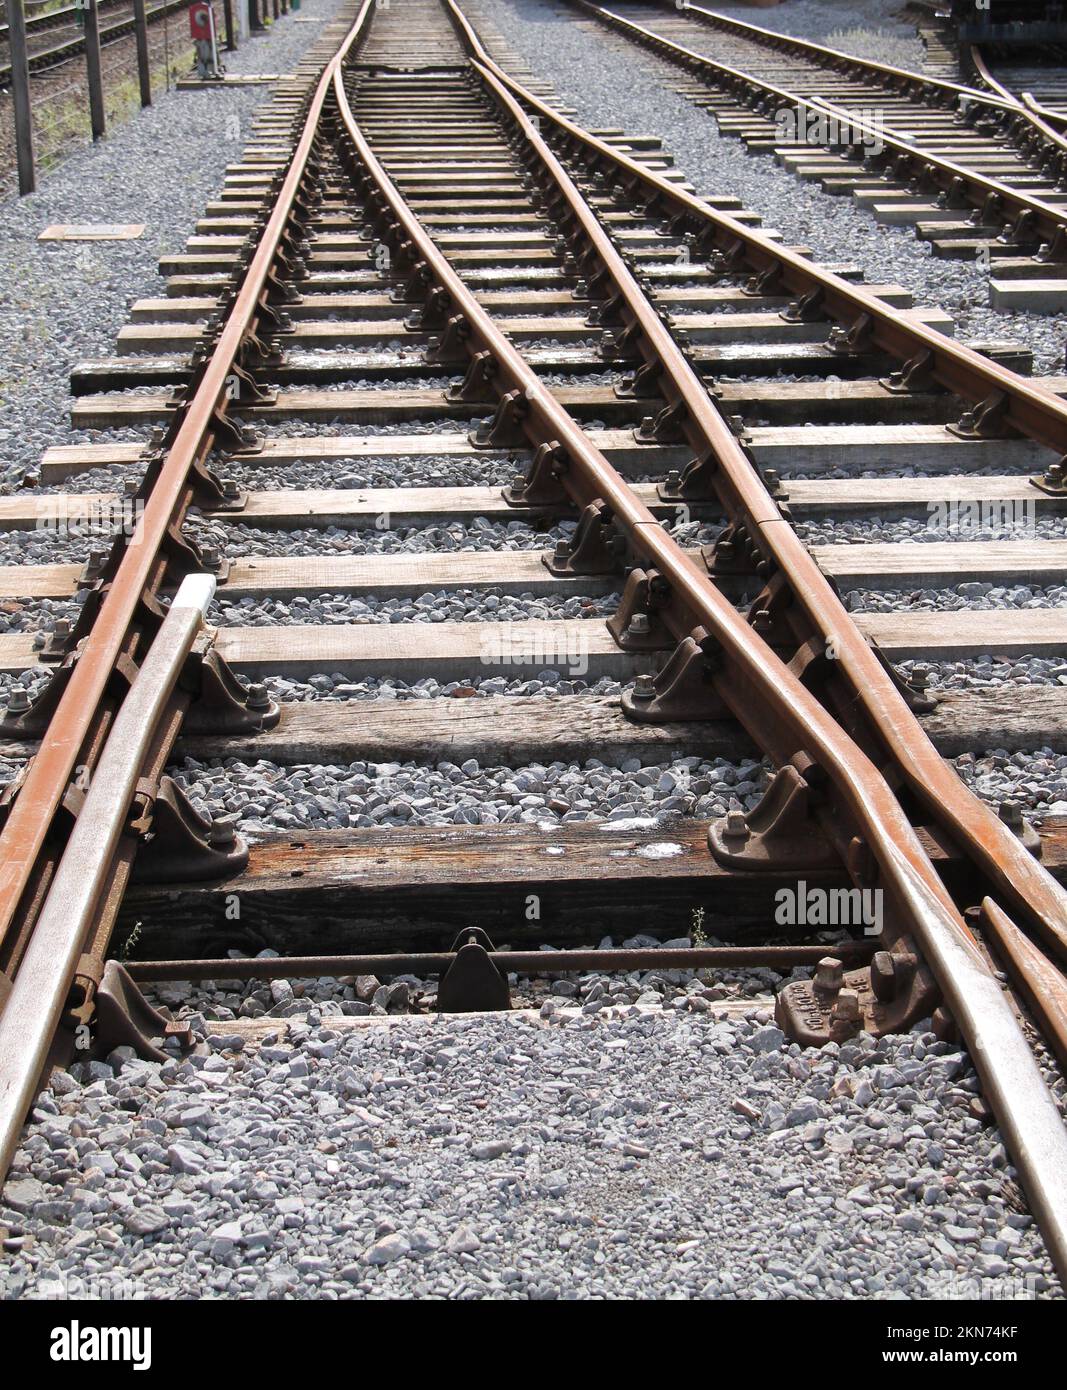 Change Over Points on a Railway Train Track. Stock Photo